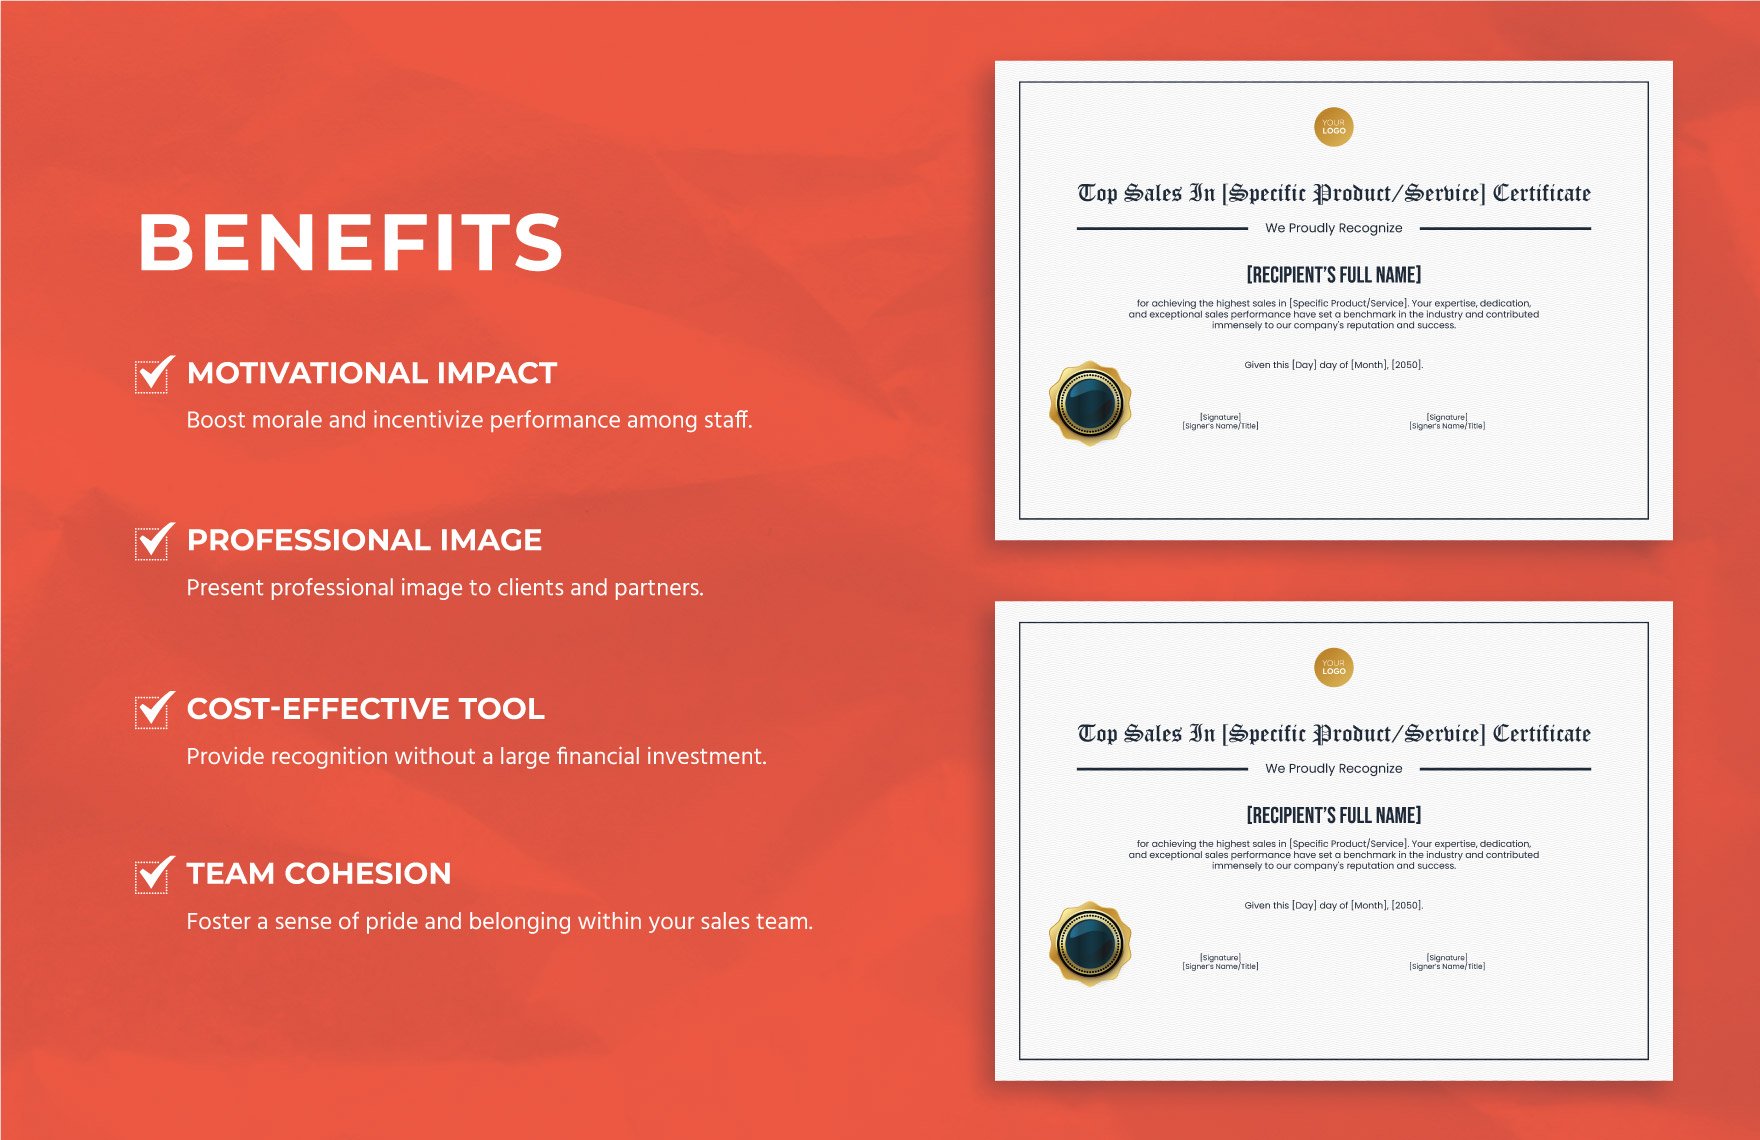 Top Sales in Specific ProductService Certificate Template